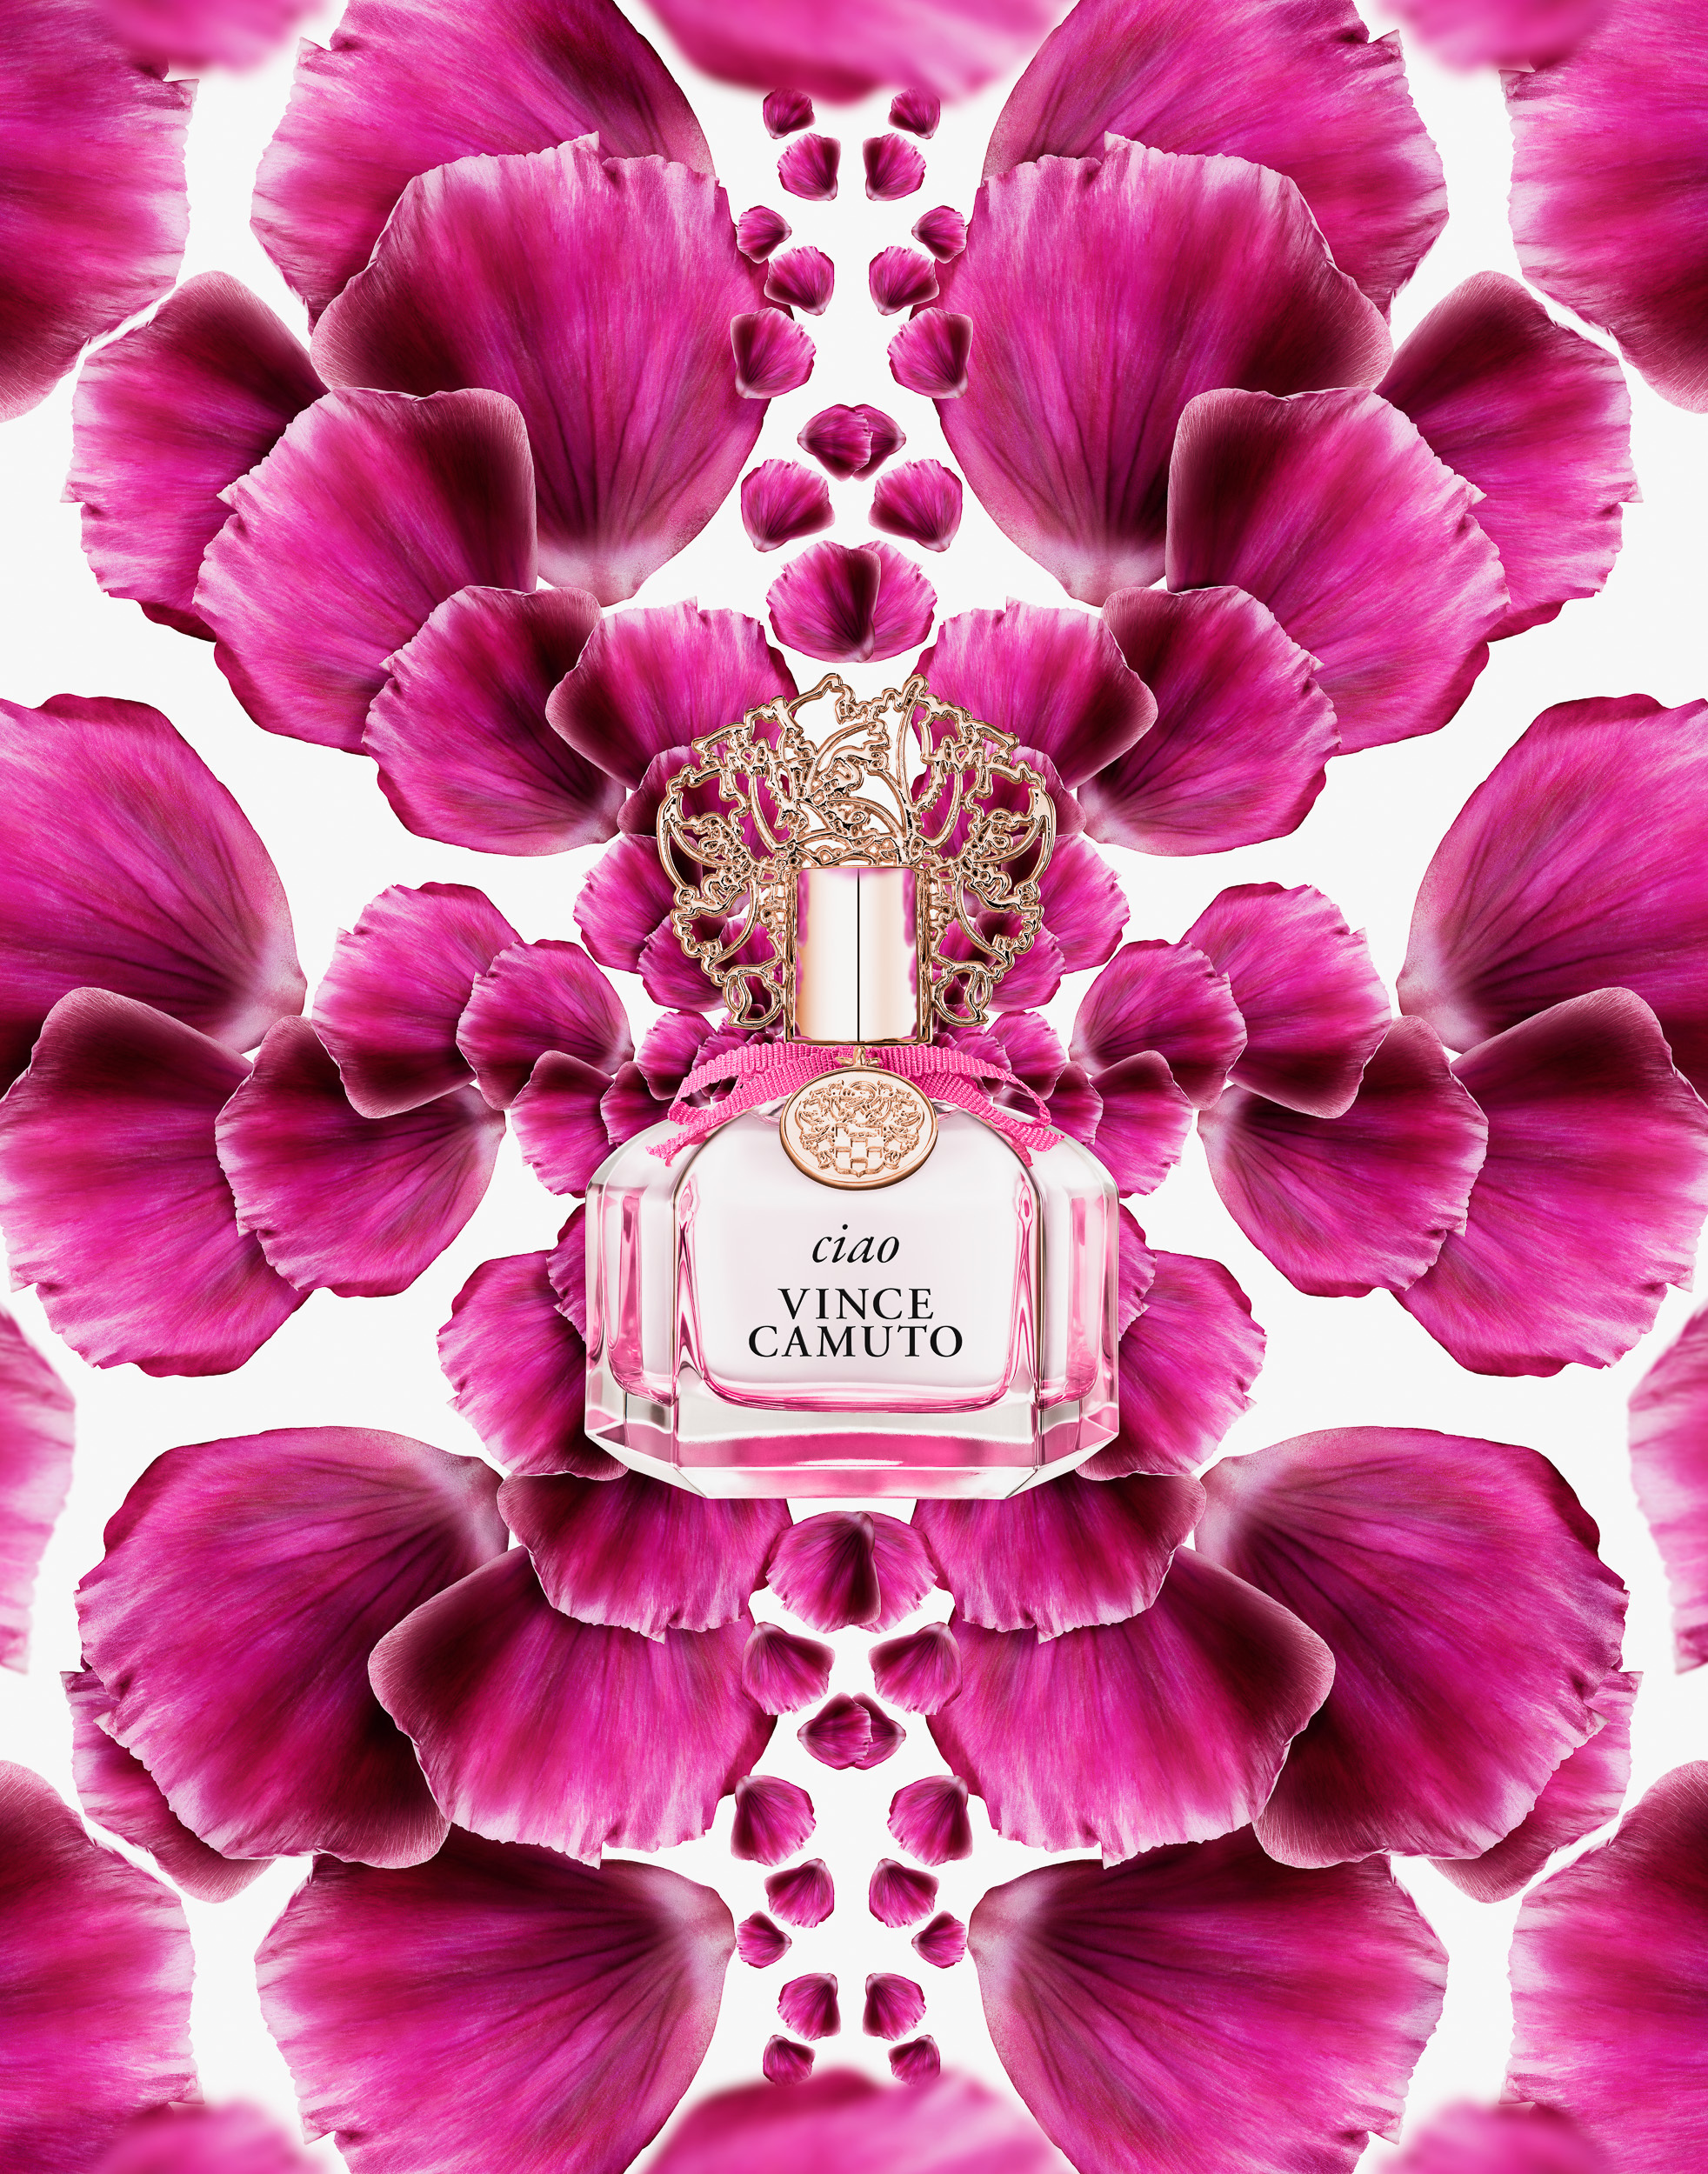 Vince Camuto Women Perfume & Fragrance photography by commercial, product & advertising photographer Timothy Hogan in the Los Angeles Studio